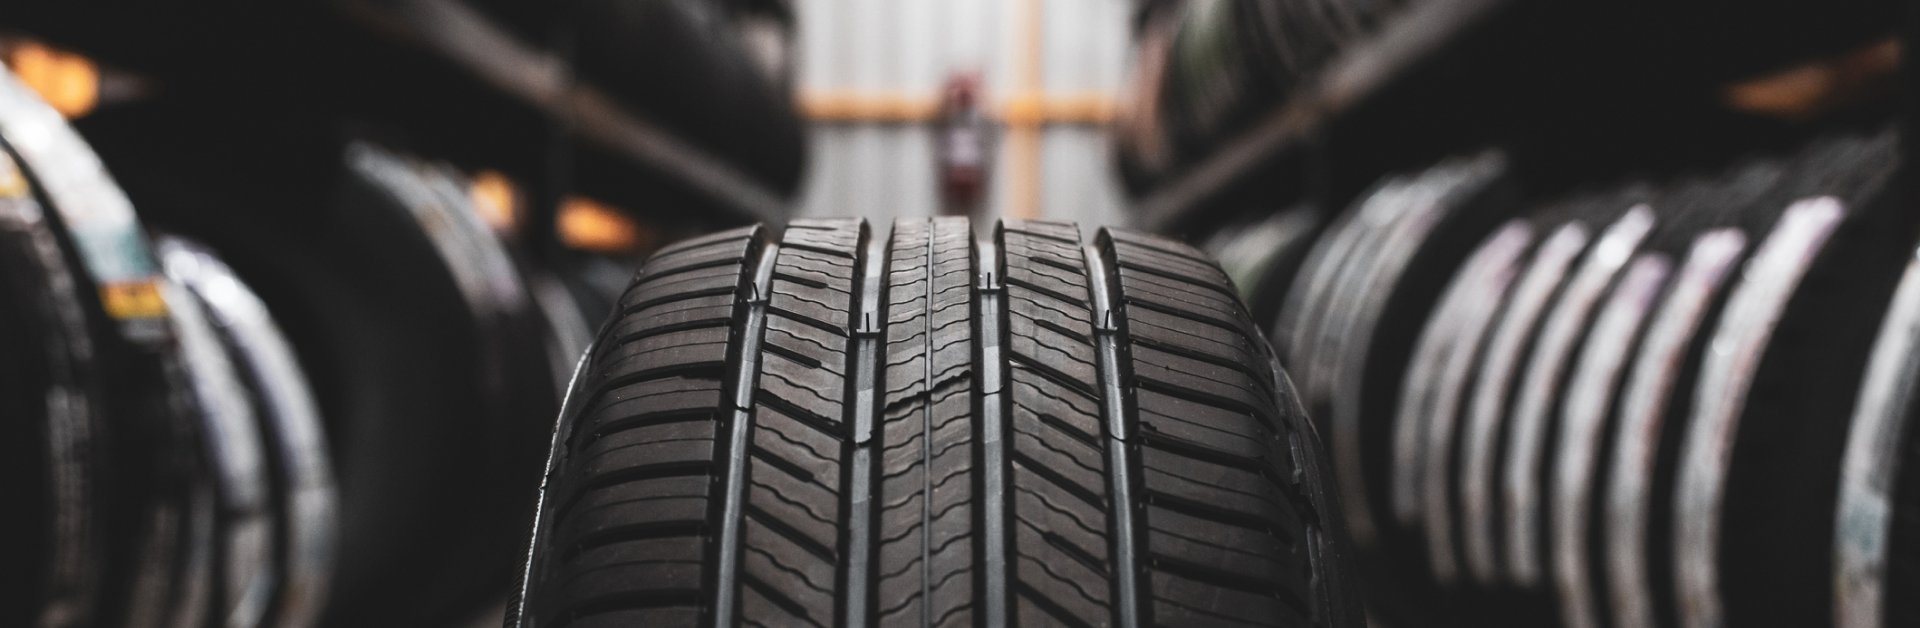 Tires Online at Tire Source